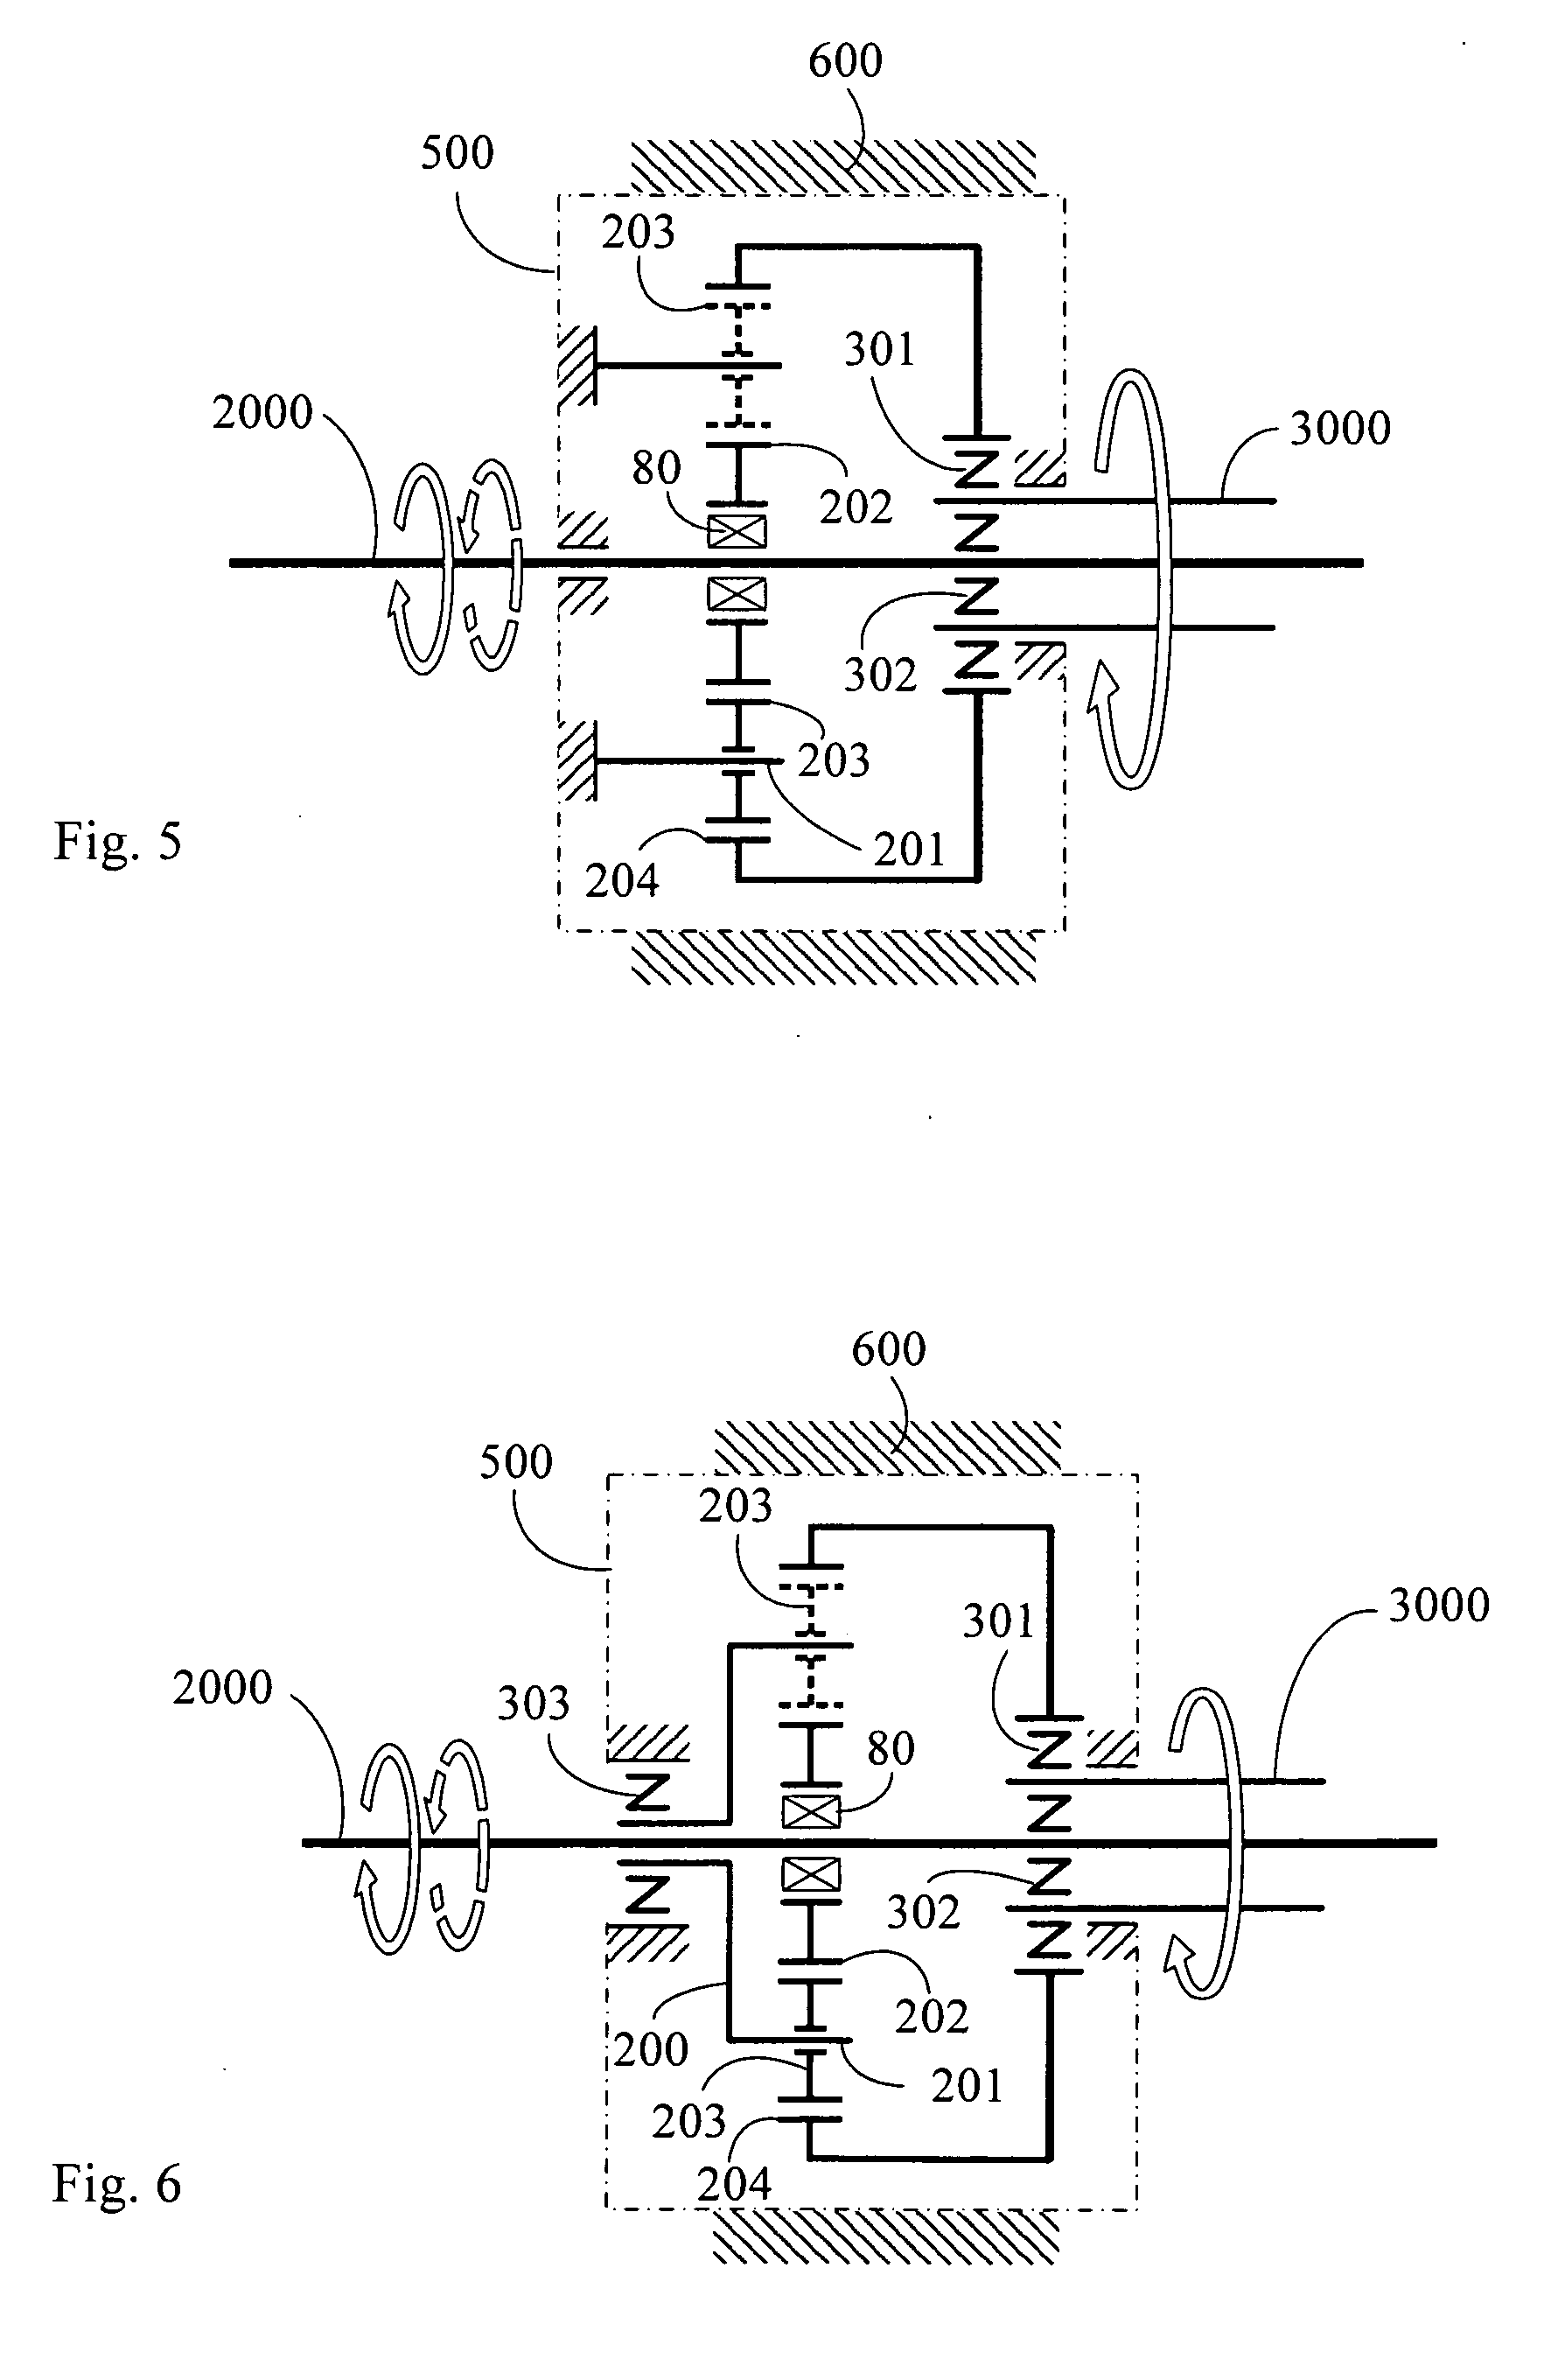 Retrograde torque limit bicycle with bidirectional input and one-way output